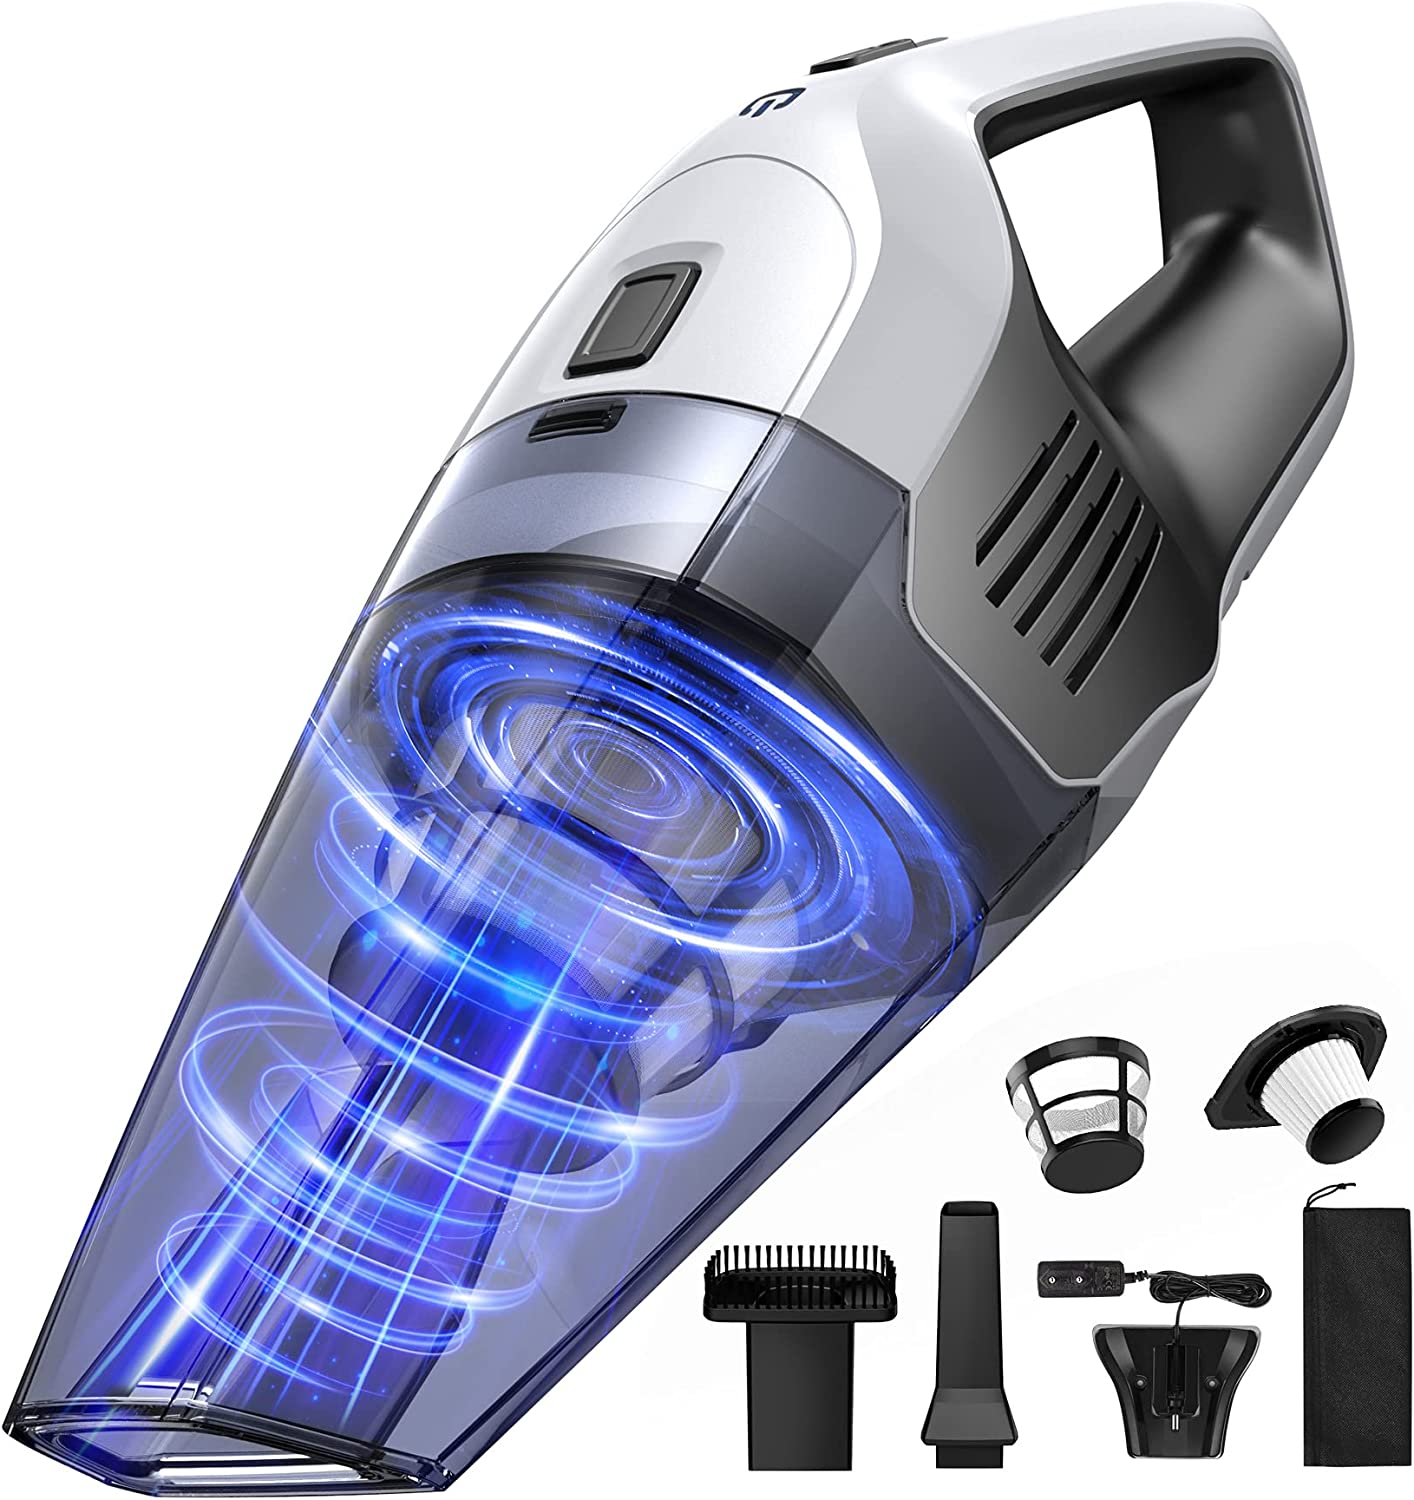 Handheld Vacuum Cleaner, 8000Pa Strong Suction [...]